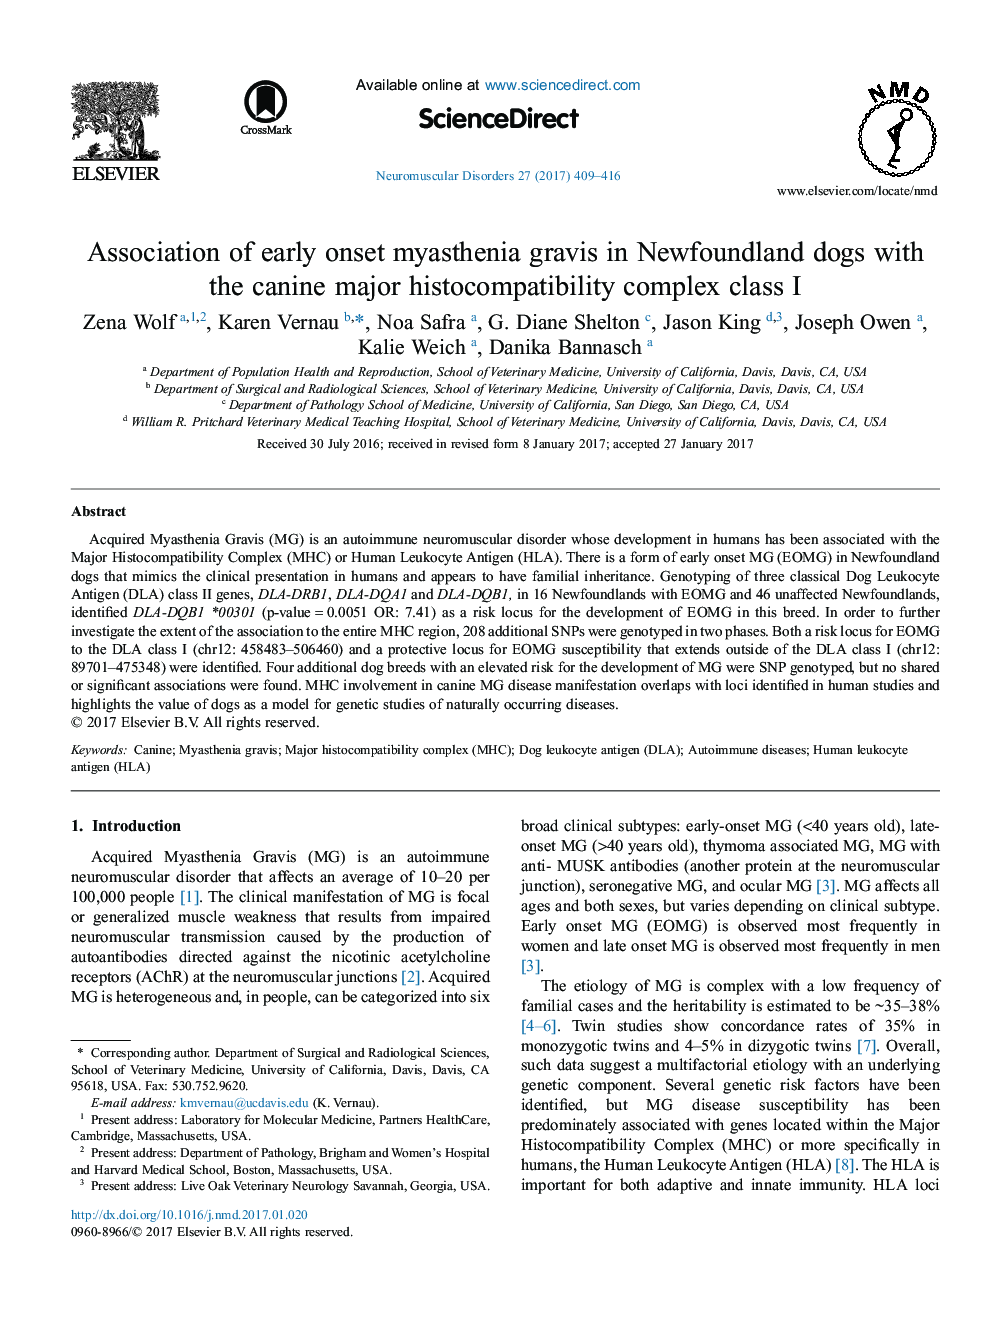 Association of early onset myasthenia gravis in Newfoundland dogs with the canine major histocompatibility complex class I